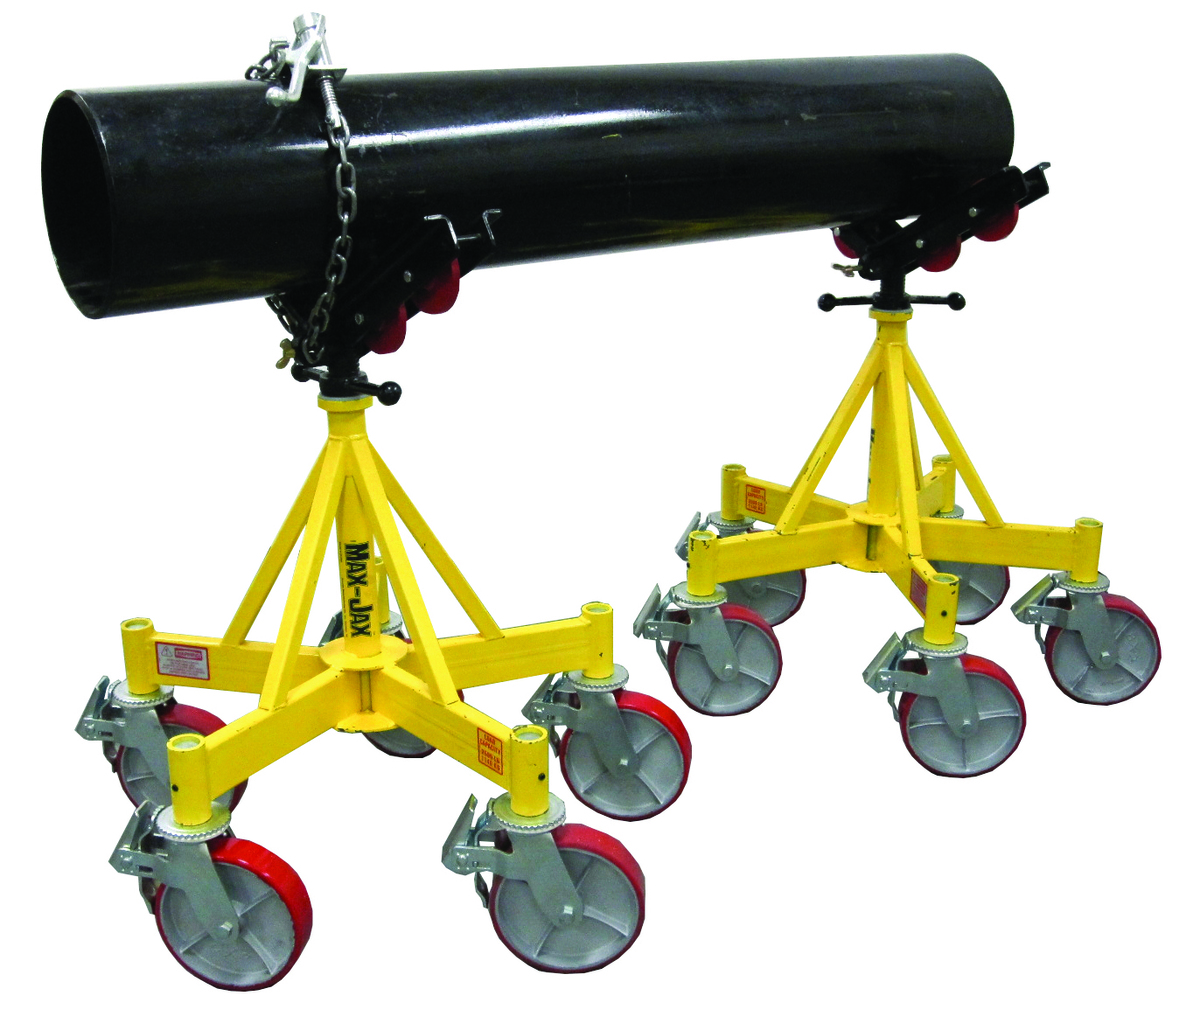 Max Jax™ Kit No. 1 - includes basic stand, roller head kit & casters